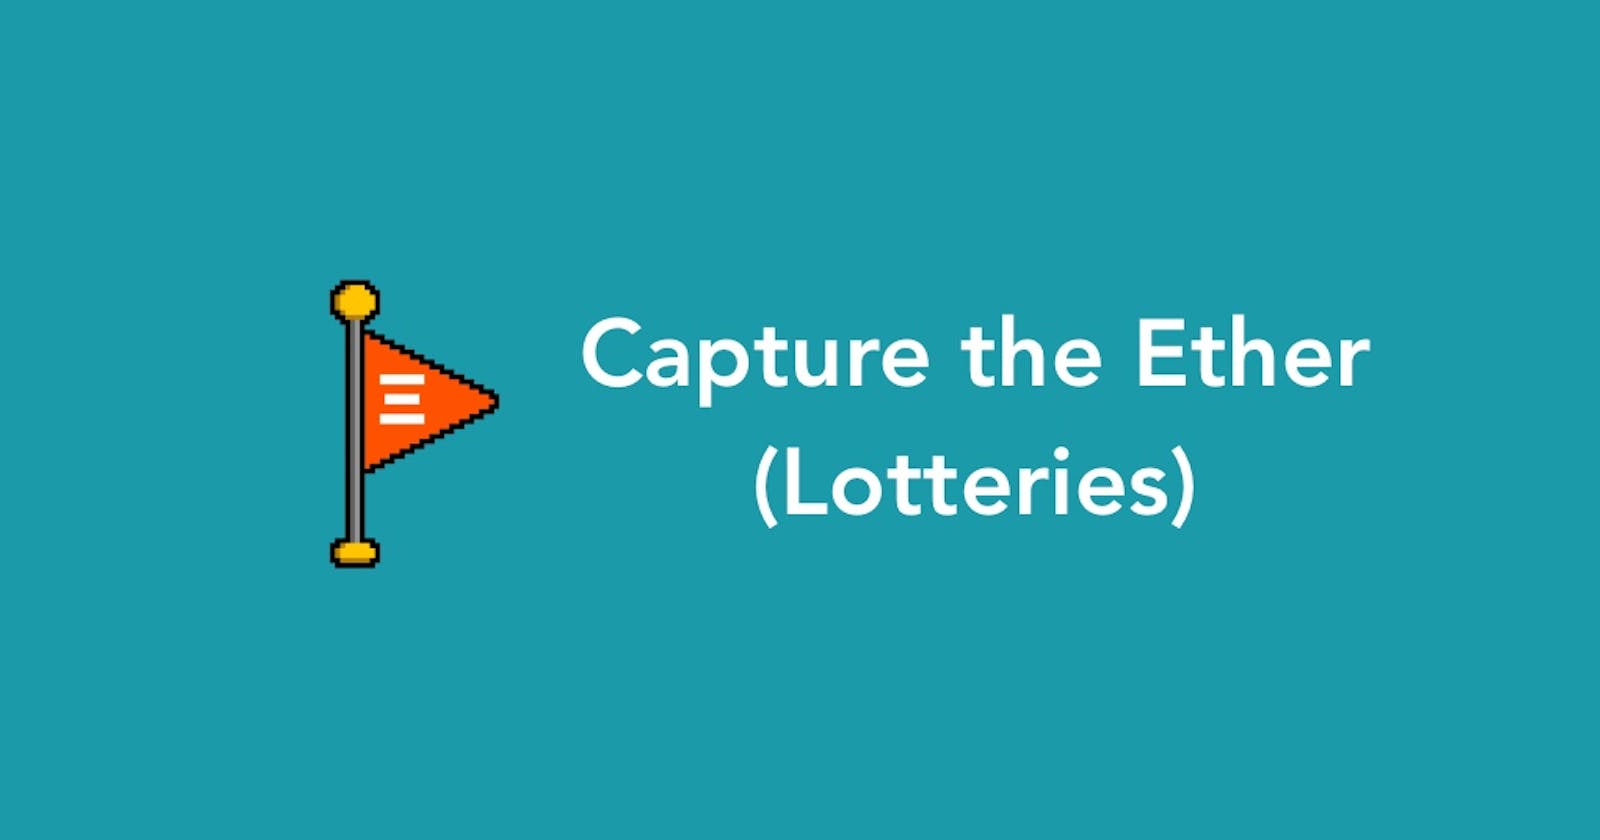 Capture The Ether 题解（Lotteries）